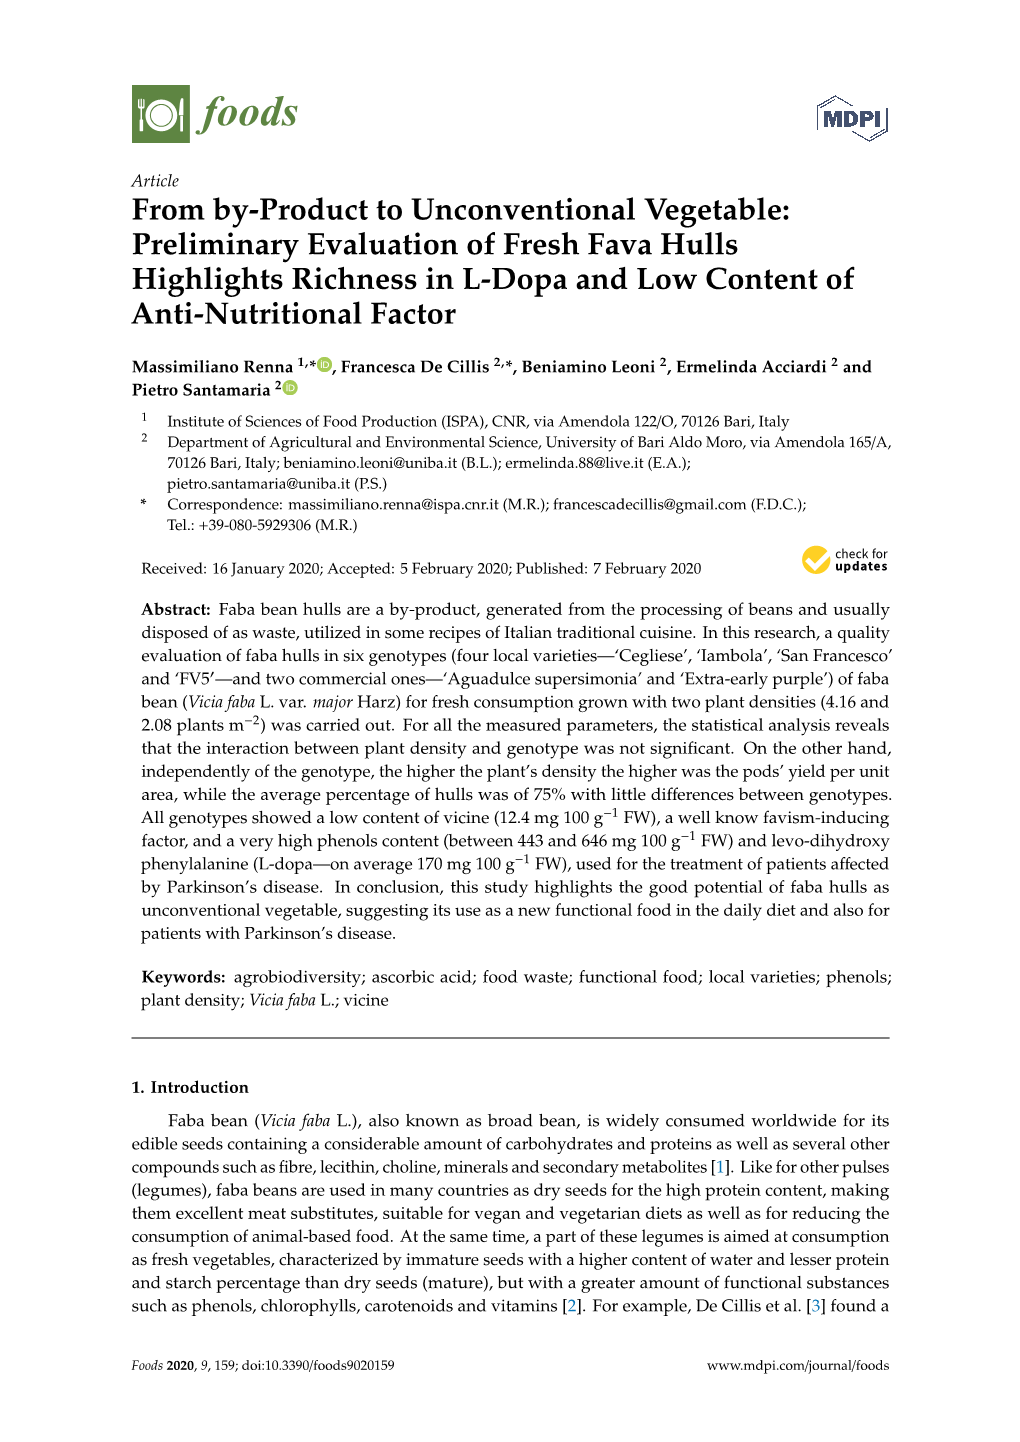 Preliminary Evaluation of Fresh Fava Hulls Highlights Richness in L-Dopa and Low Content of Anti-Nutritional Factor